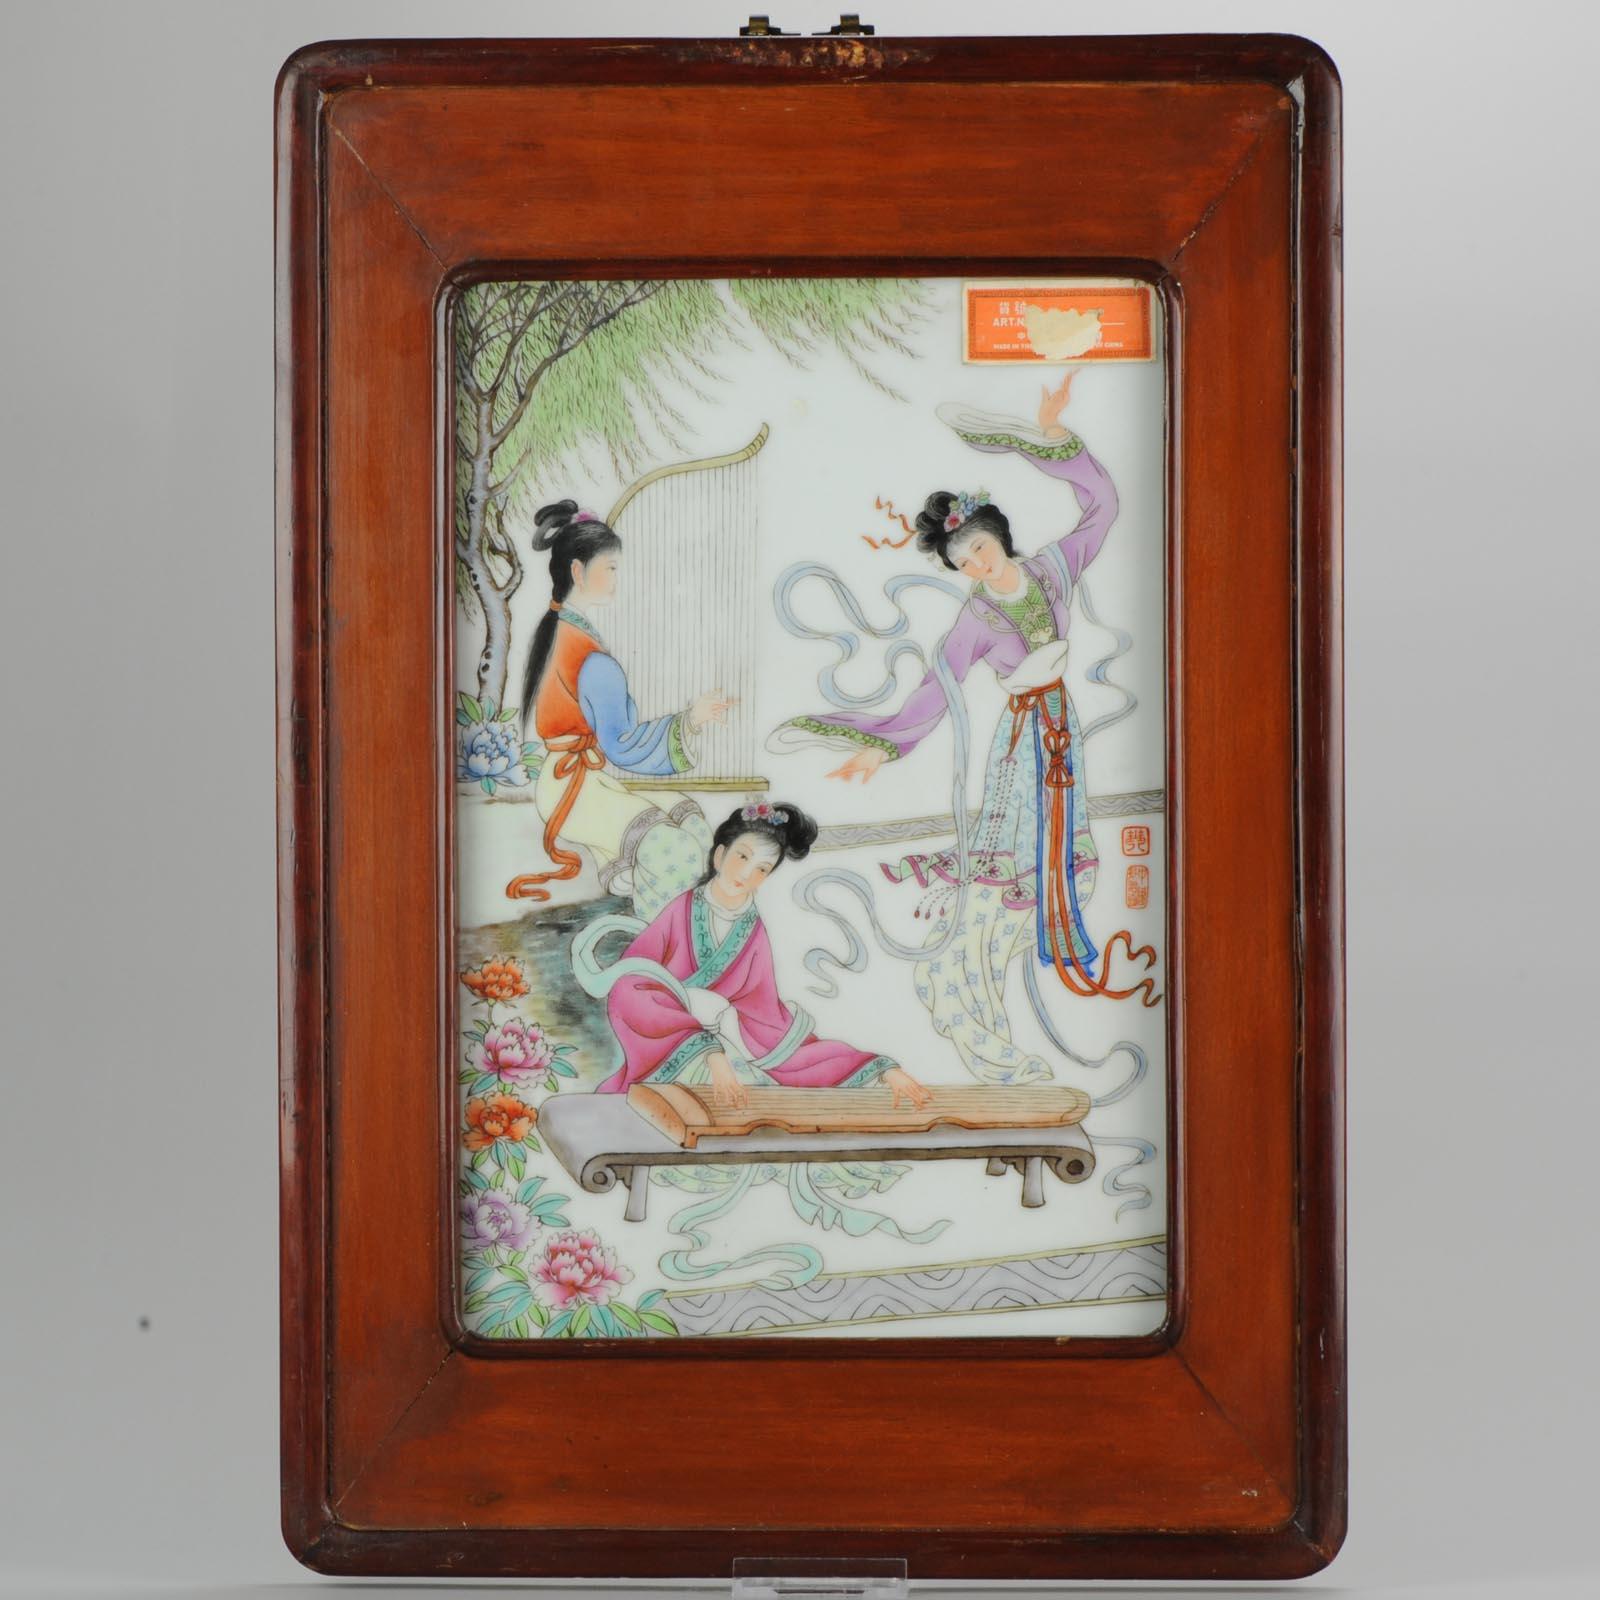 A set of 3 Porcelain plaques in nice wooden frame, with characters and ladies doing leisure activities
Dimensions plaque 36.5cm x 24.5cm. Frame Total 53 x 37cm

The plaque will be sent with track and trace, safely packed and